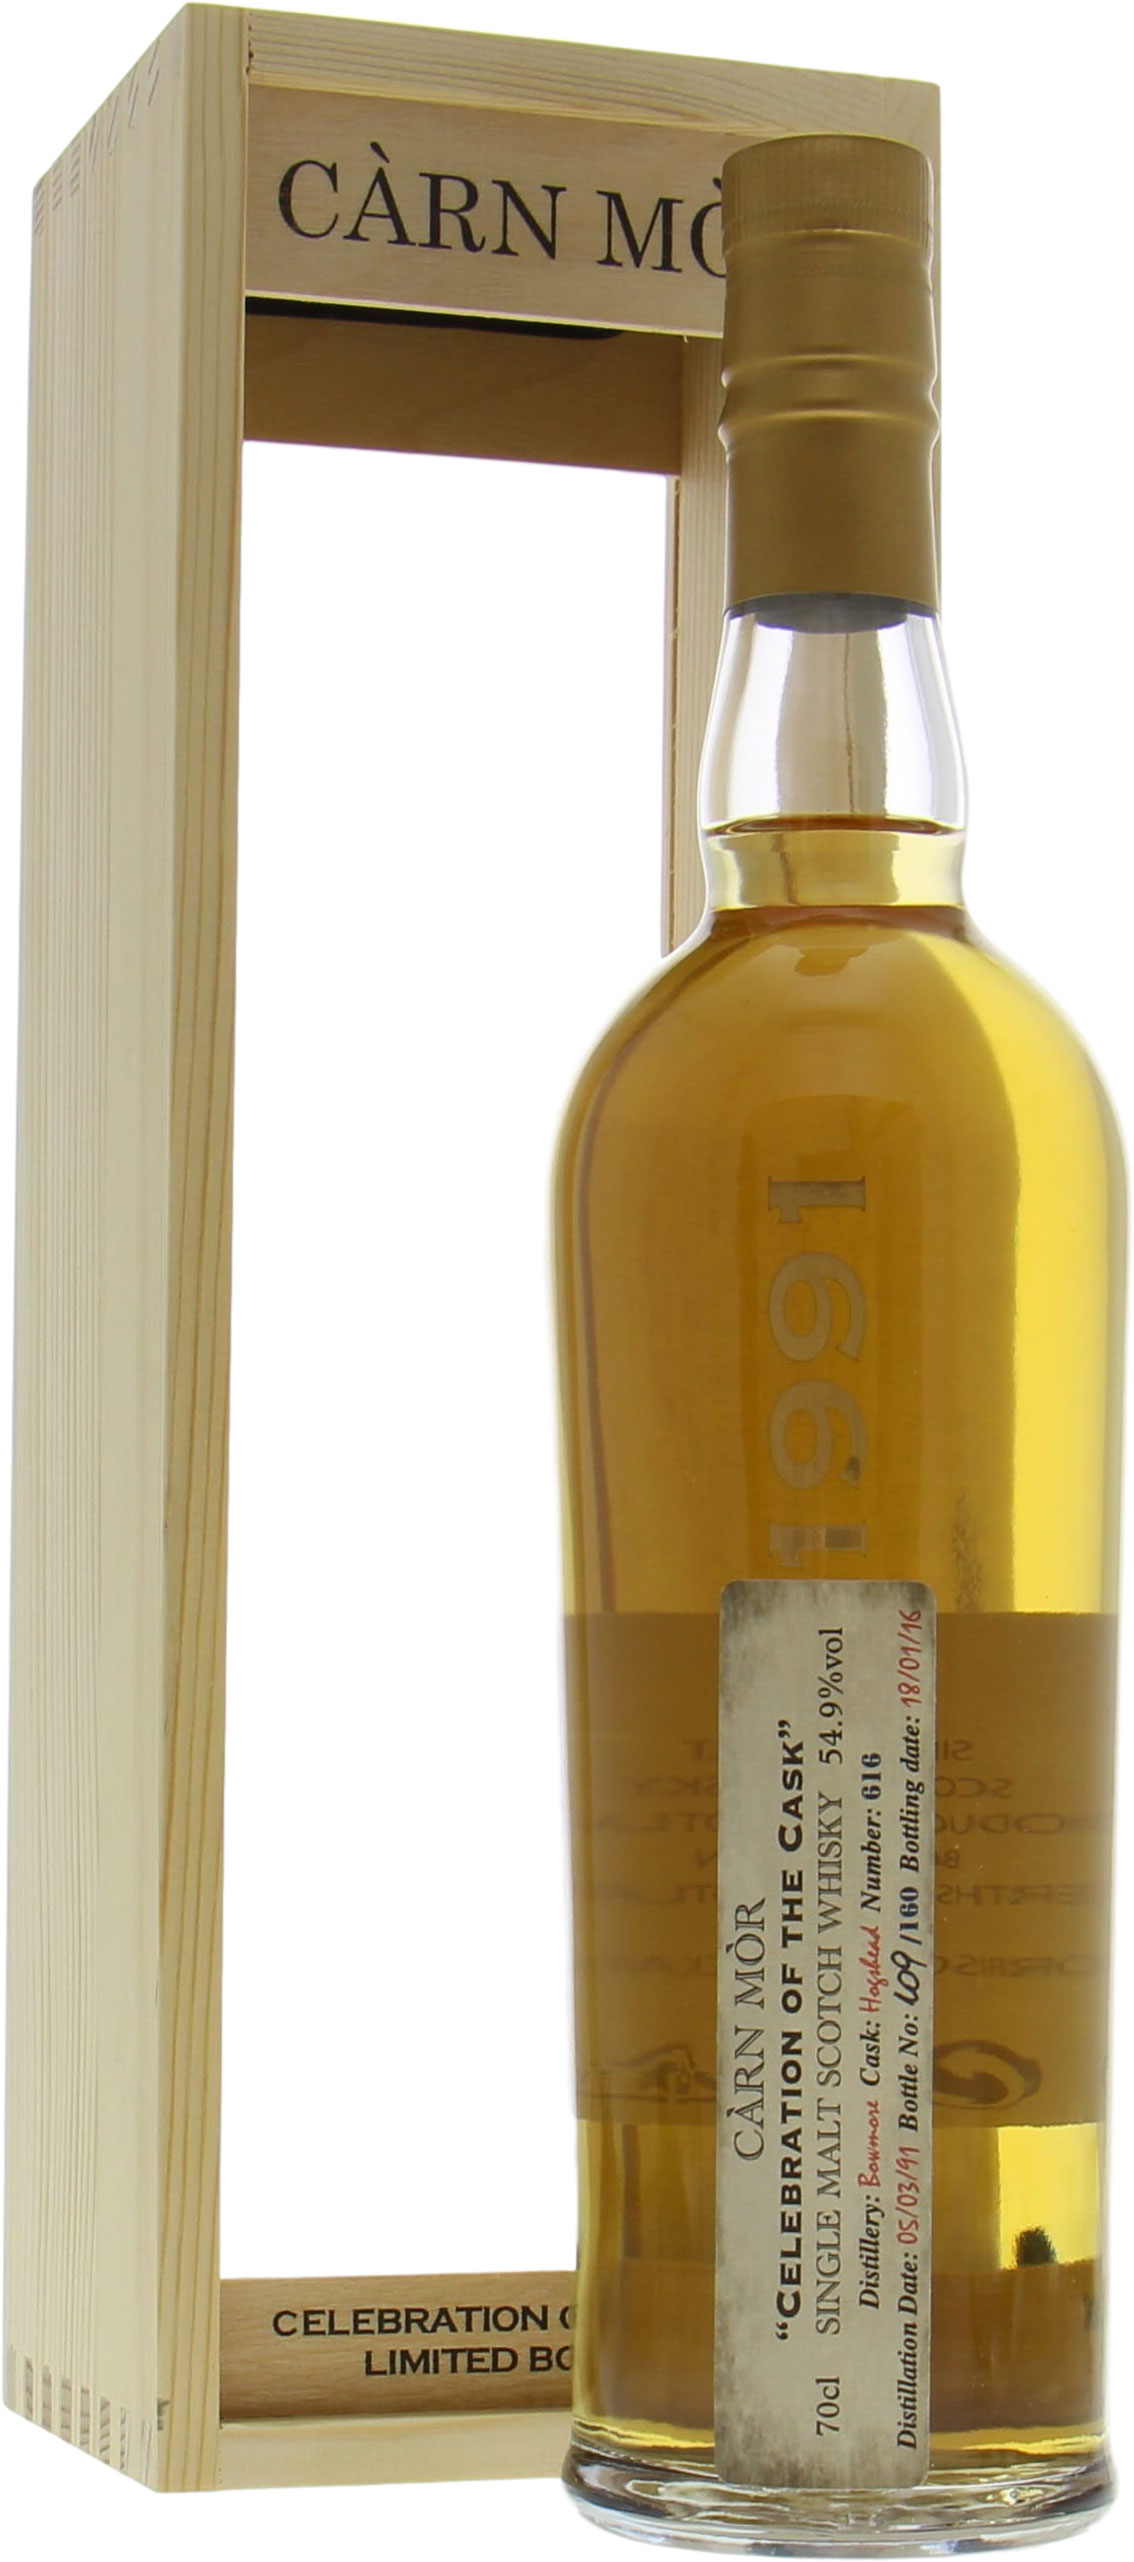 Bowmore - 24 Years Old Celebration of the Cask 616 54.9% 1990